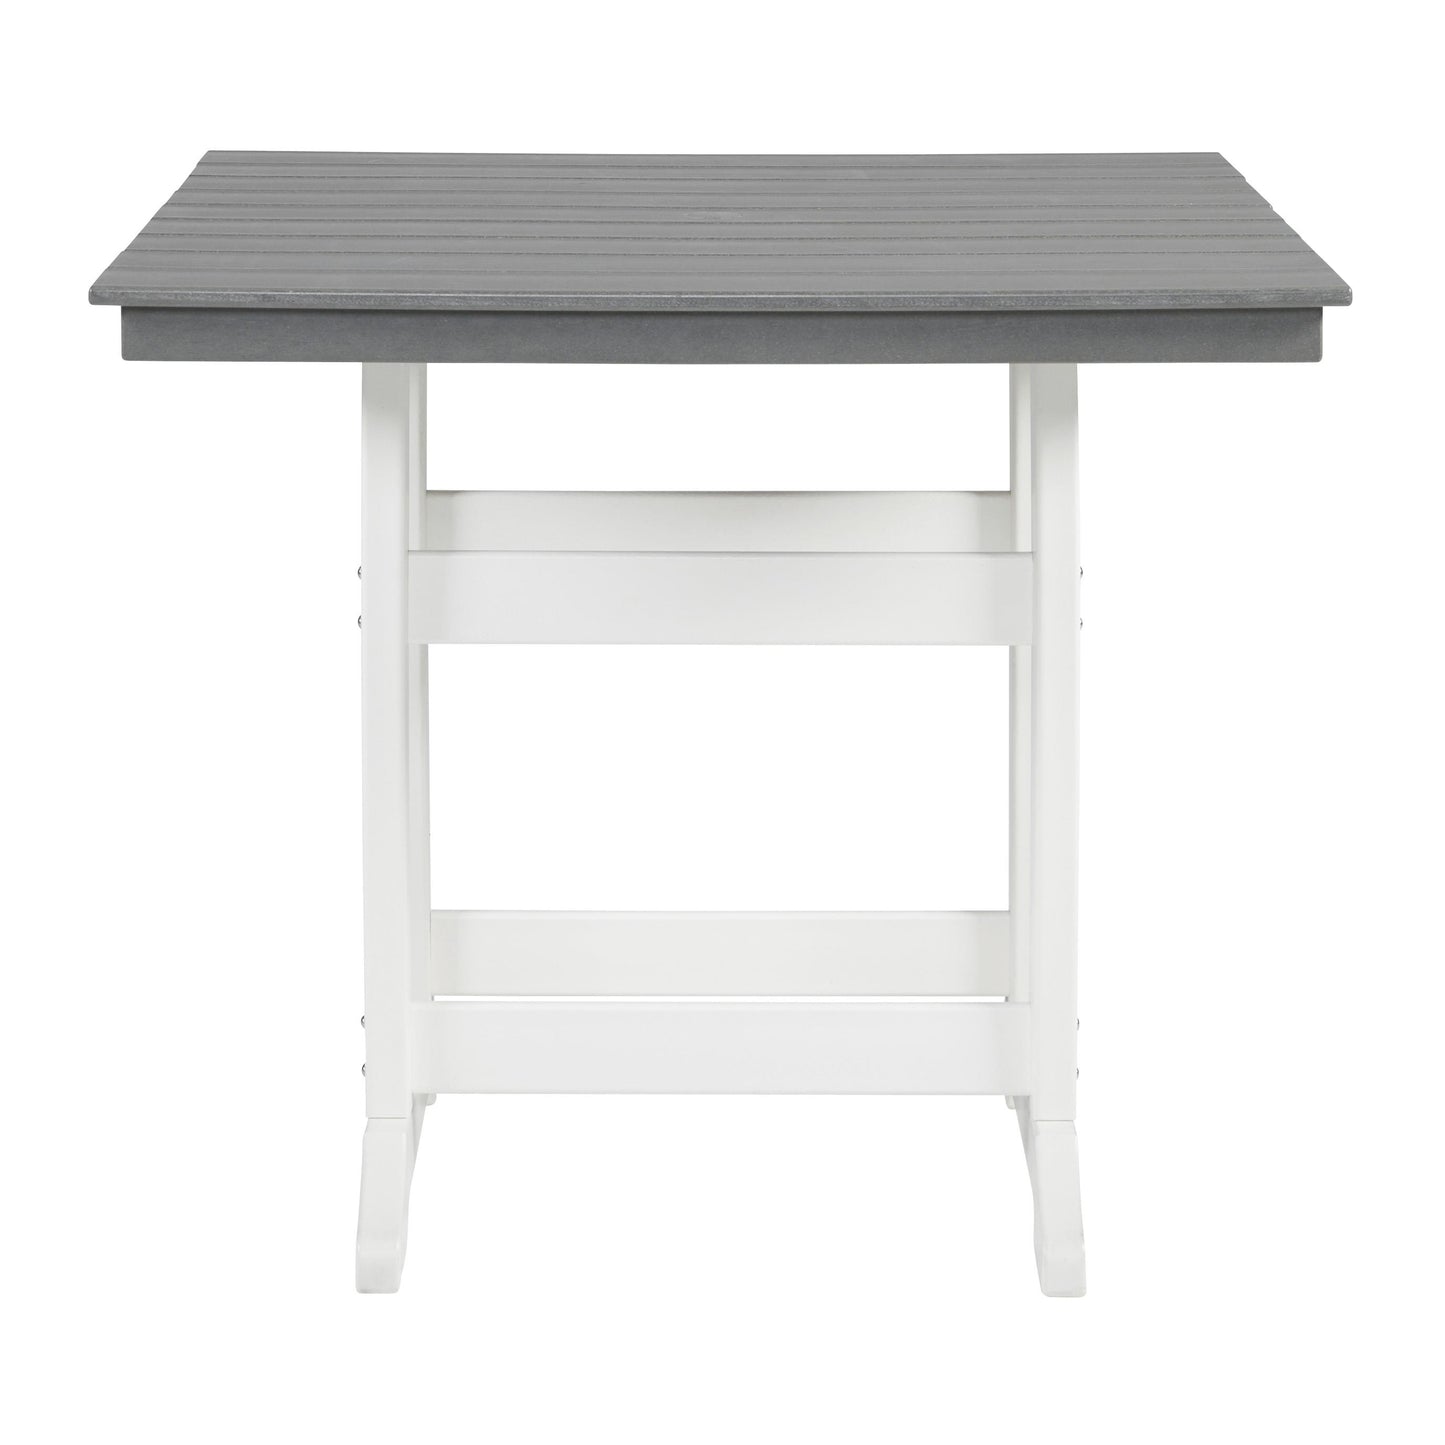 Signature Design by Ashley Outdoor Tables Counter Height Tables P210-632 IMAGE 2